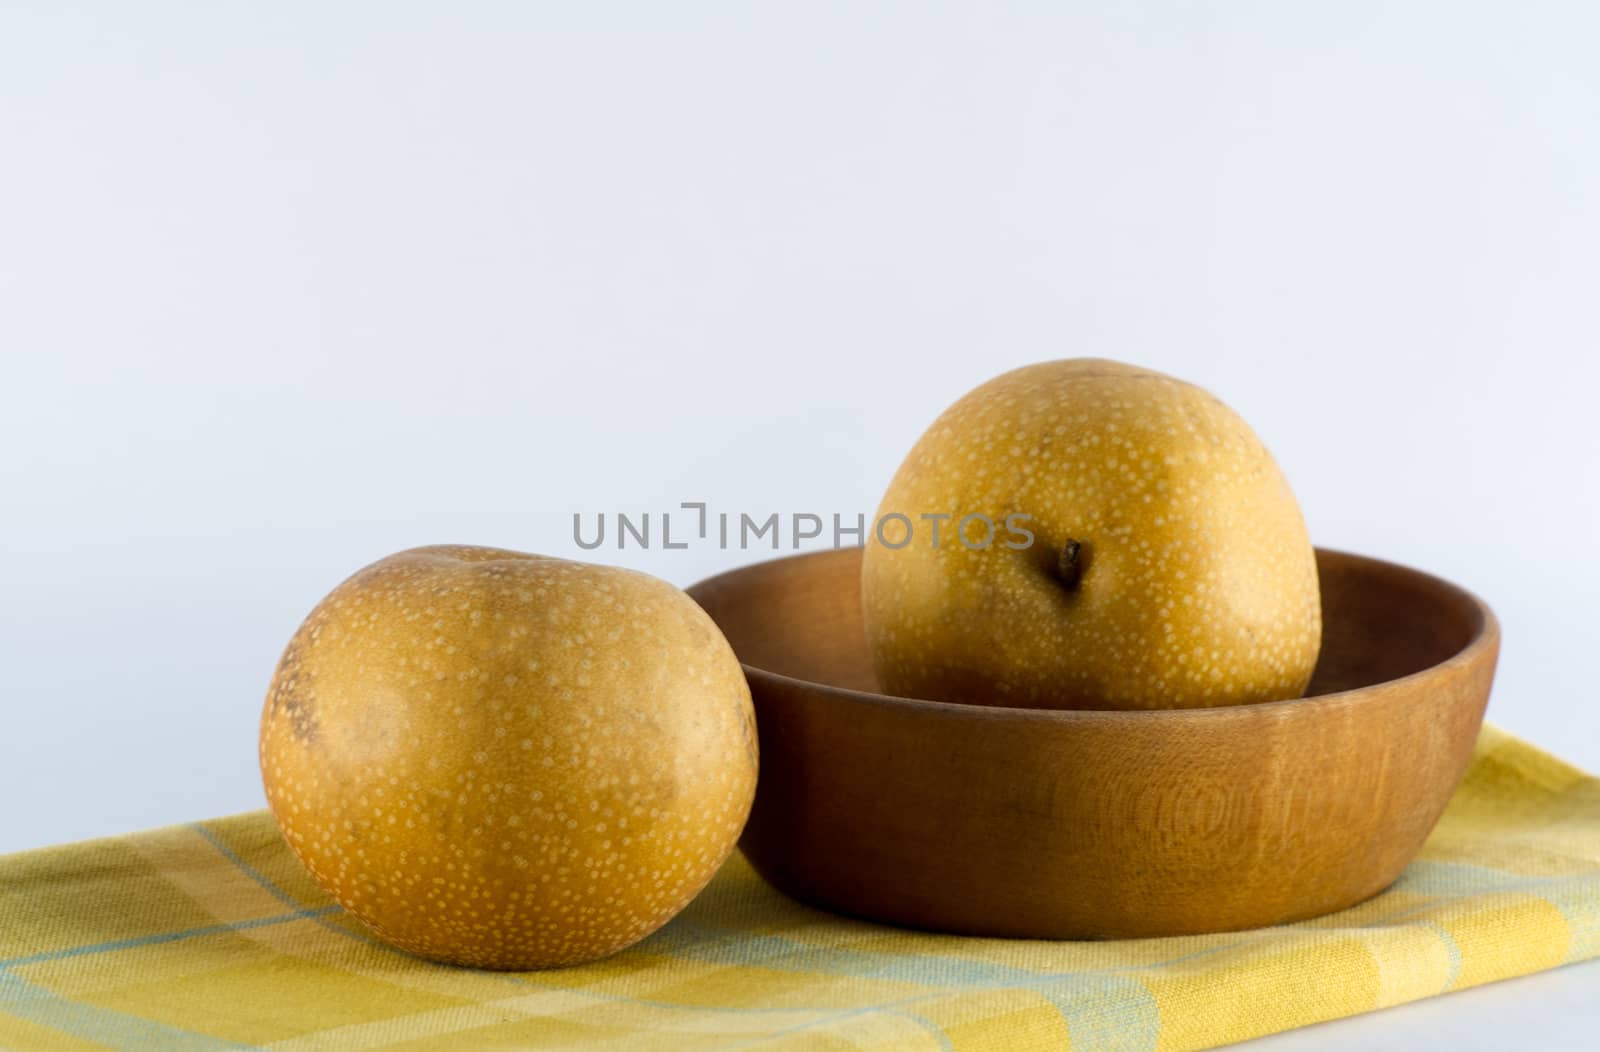 Asian Pears, Wooden Bowl, and Yellow Plaid Napkin by krisblackphotography